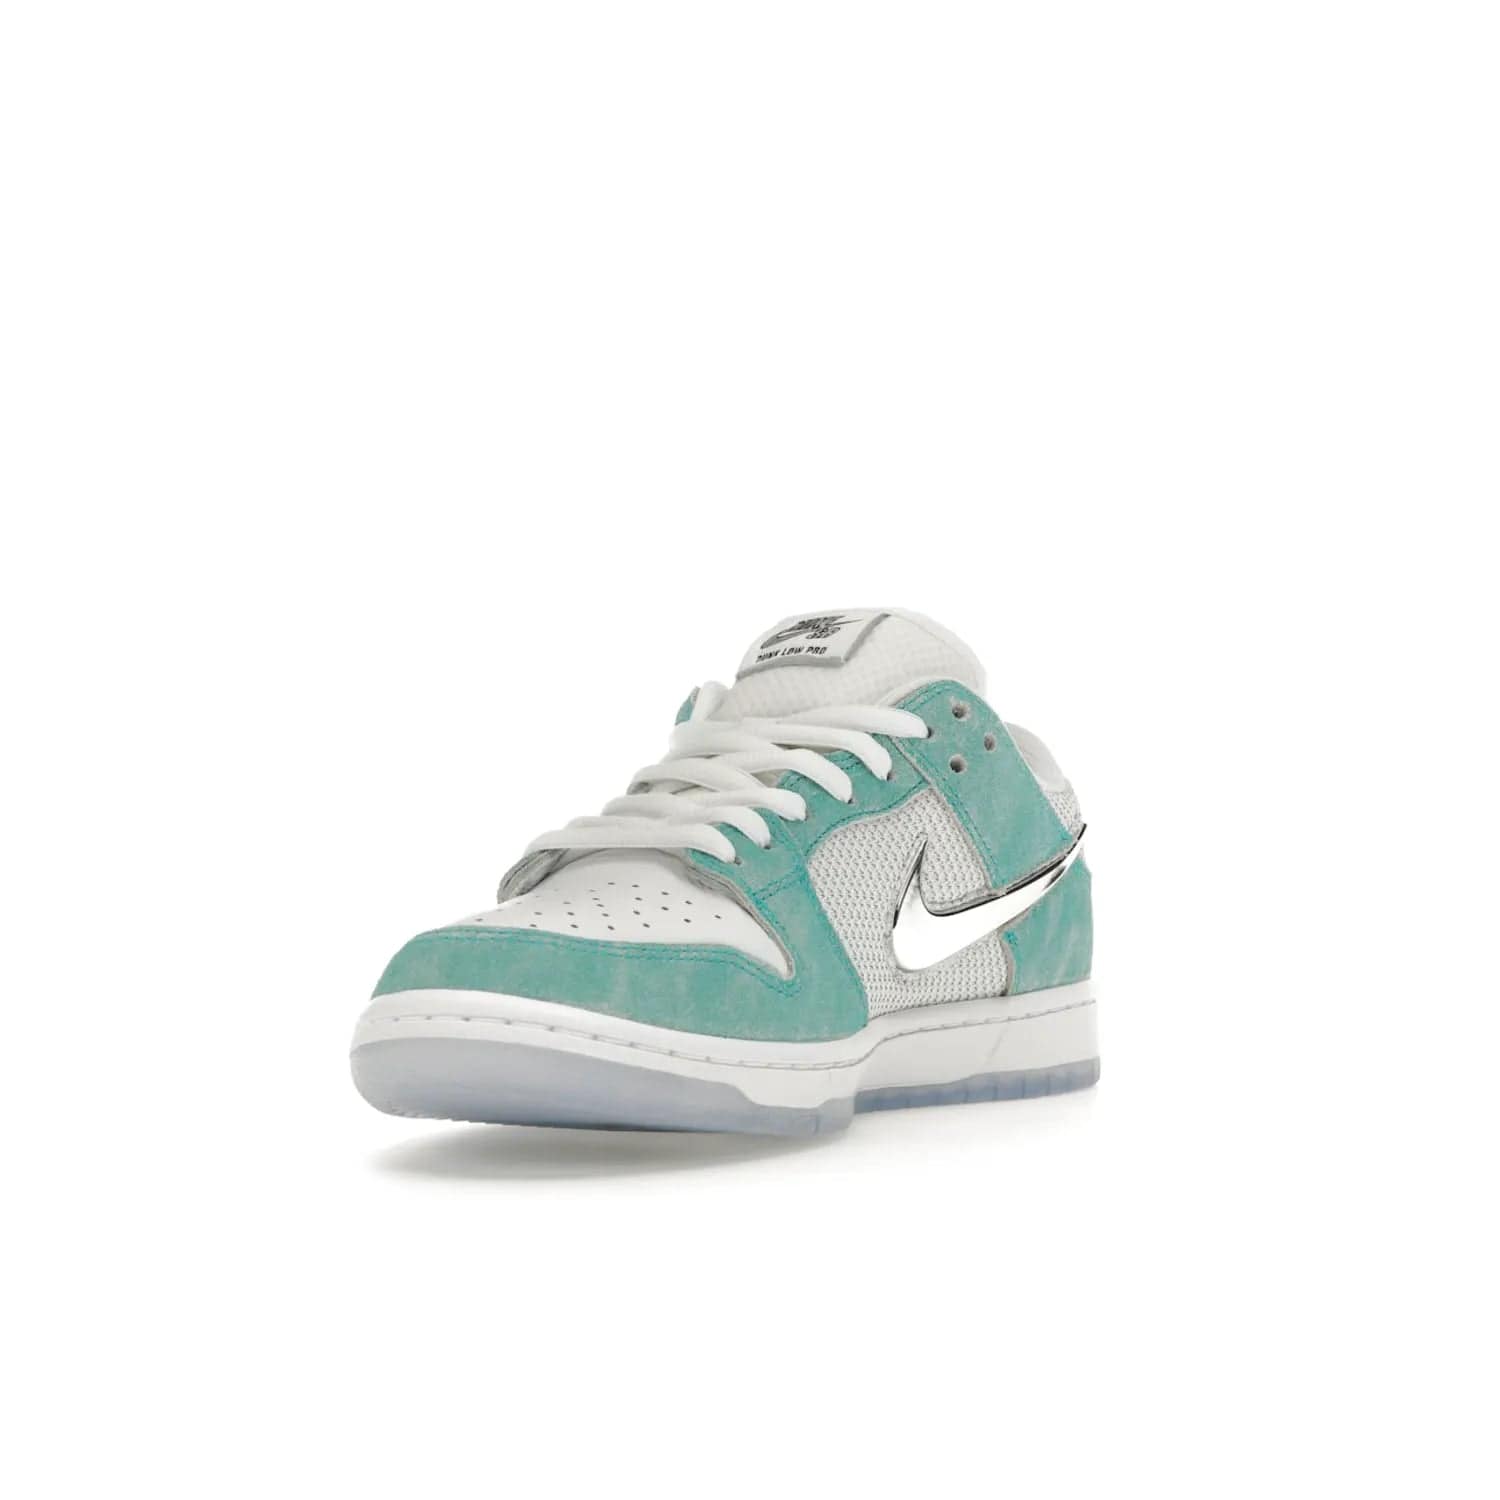 Nike SB Dunk Low April Skateboards - Image 13 - Only at www.BallersClubKickz.com - Grab Nike SB Dunk Low April Skateboards for street-ready performance. Pop of color to stand out on the playgrounds. Durable design with iconic silhouette. Price: $120. Nov 27, 2023 release. Must-have for those who live to ride.